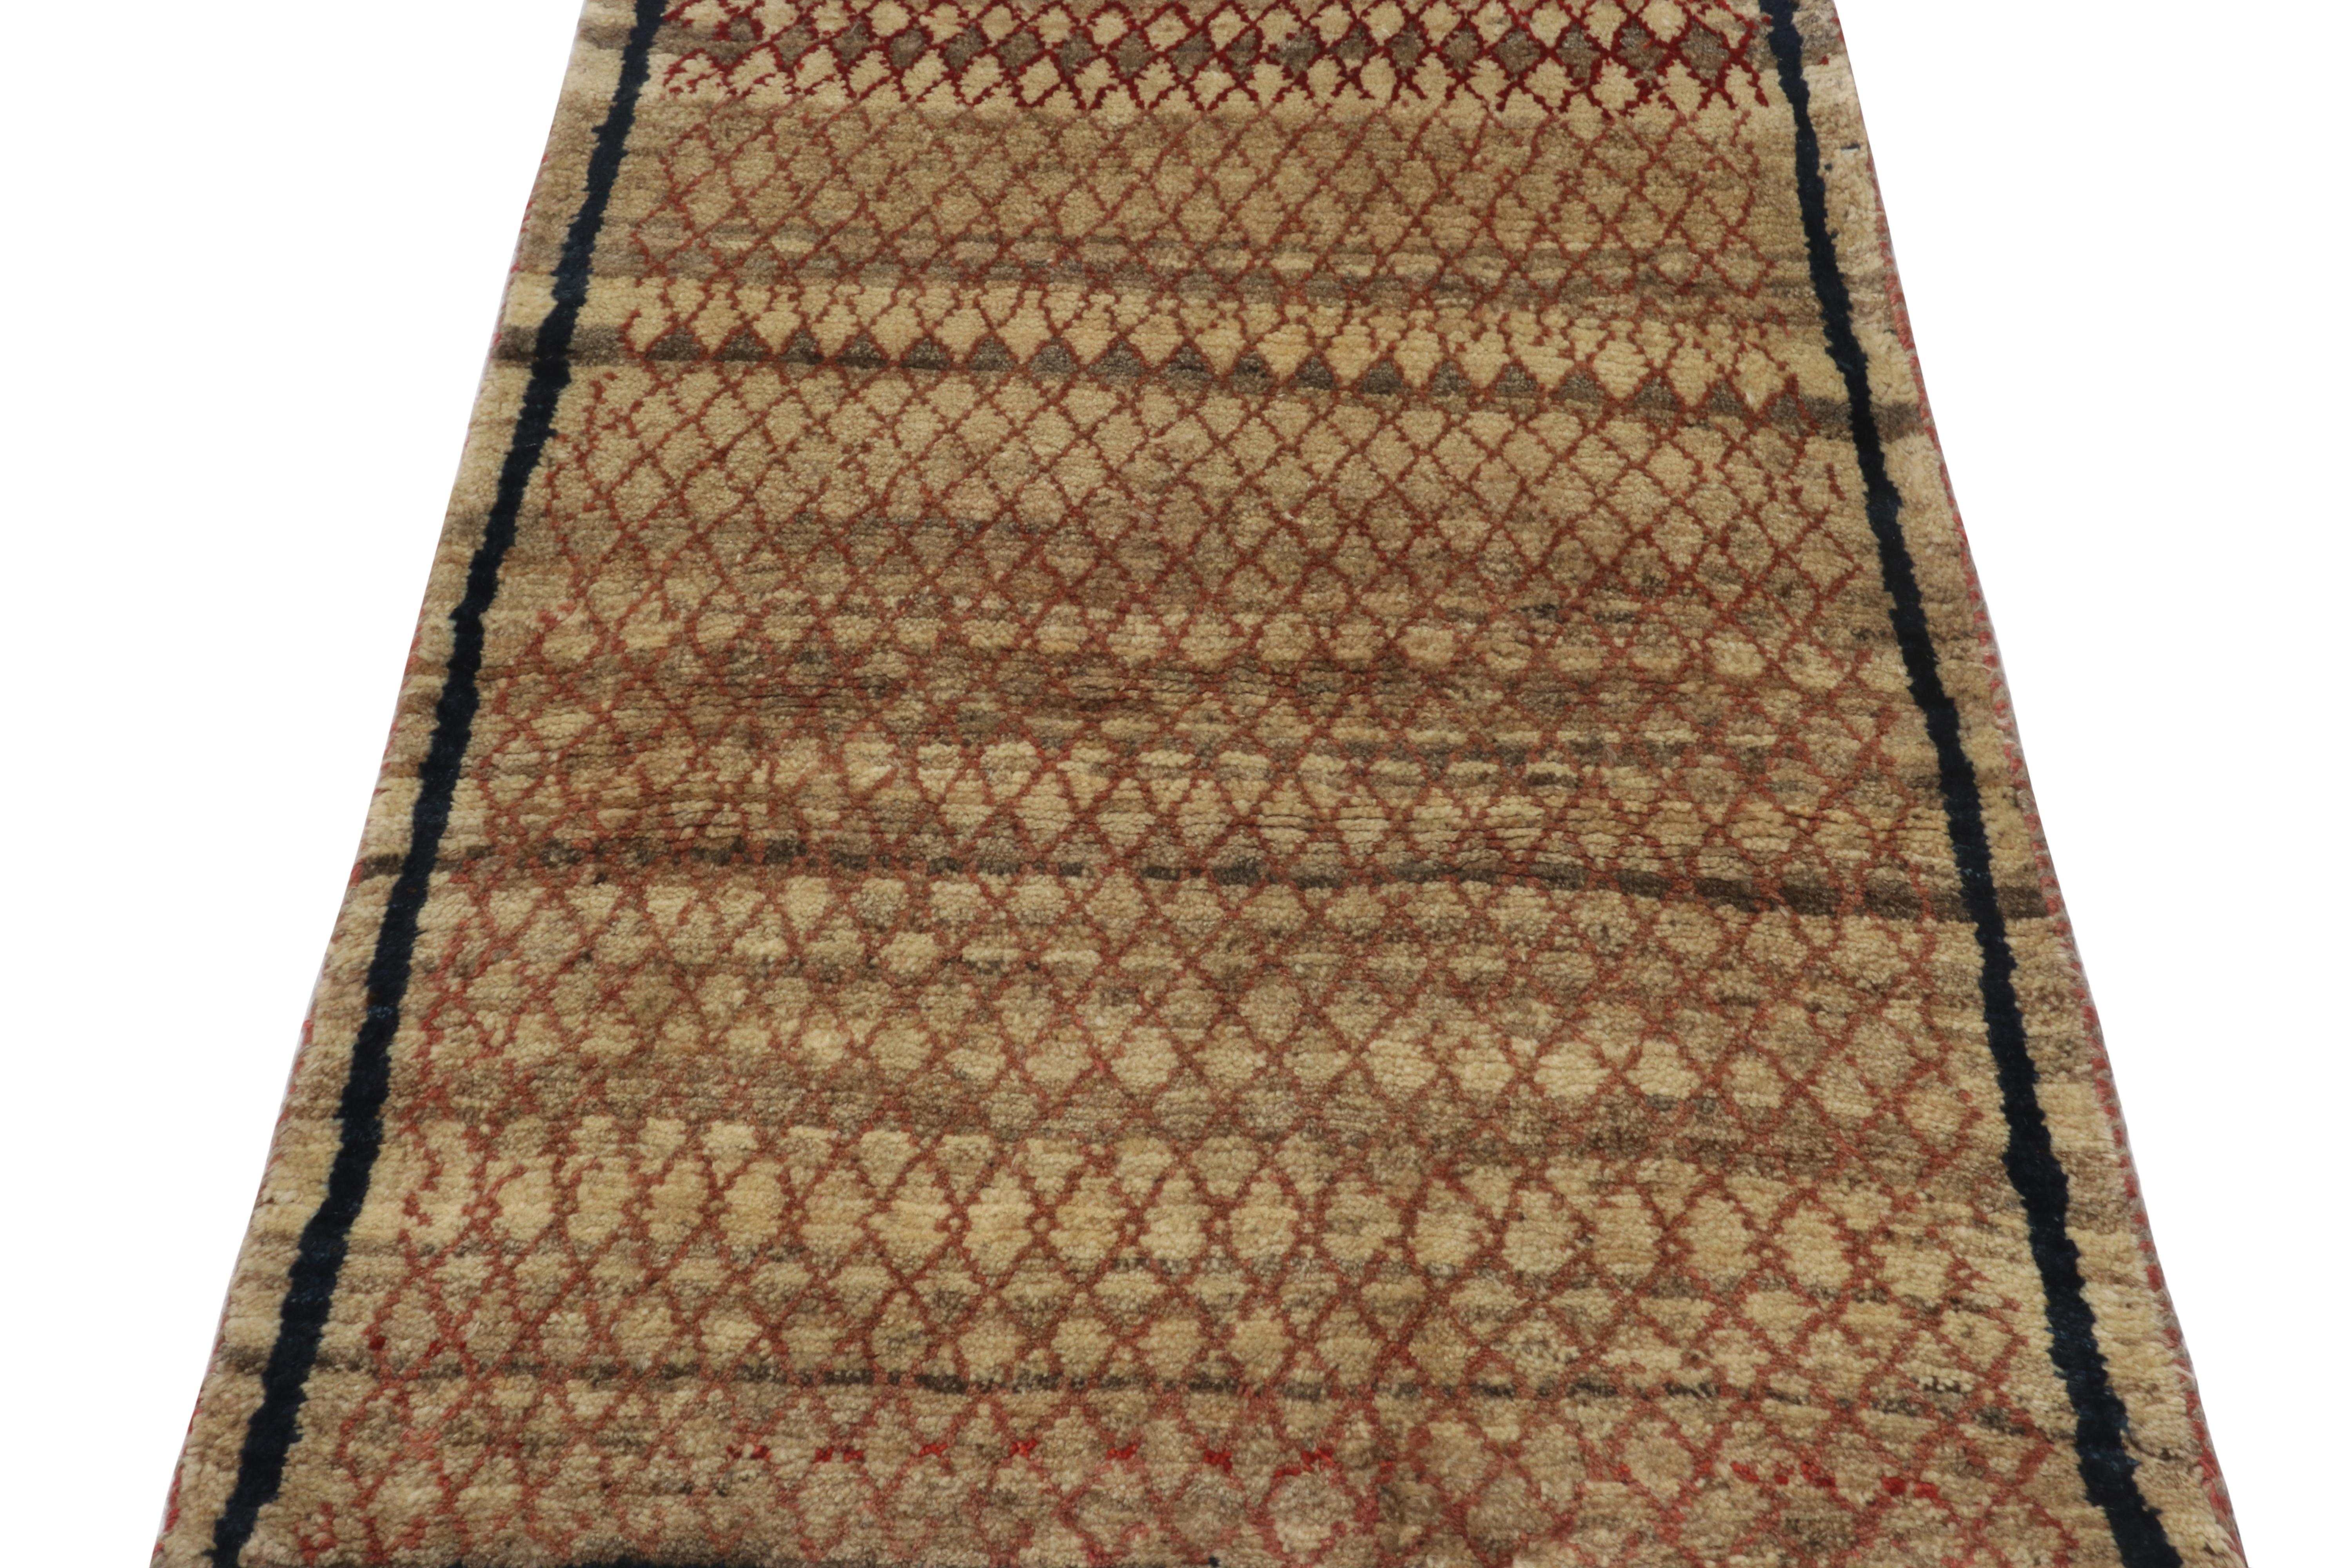 Turkish Vintage Gabbeh Tribal Rug in Beige-Brown with Red Lattice Pattern by Rug & Kilim For Sale